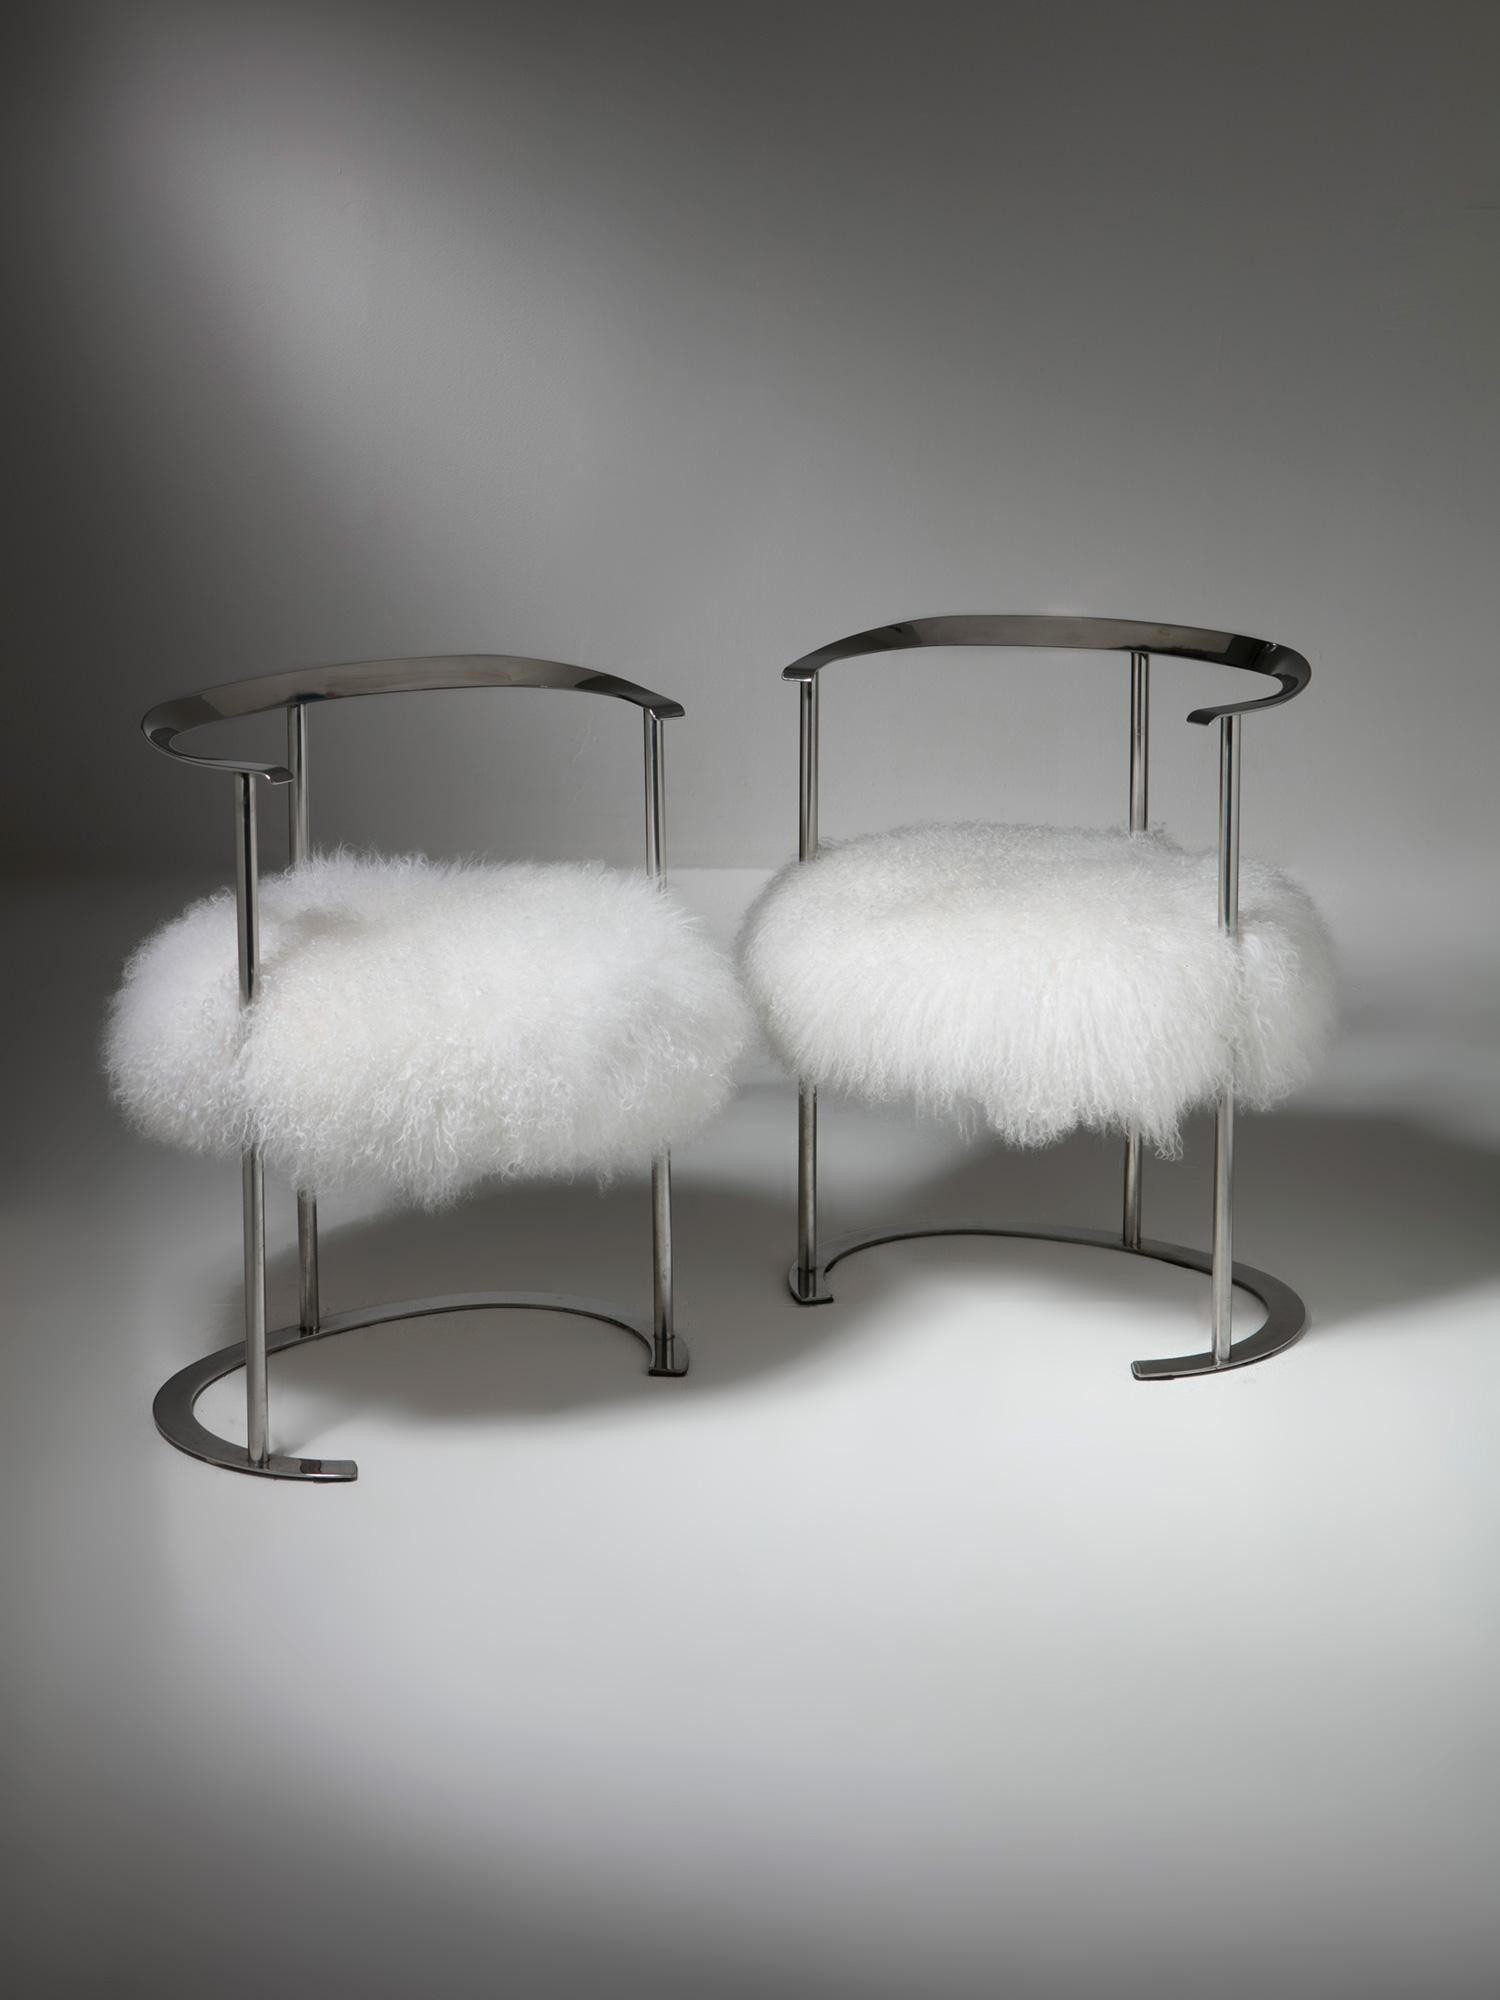 Set of two Catilina chairs by Luigi Caccia Dominioni for Azucena.
Mohair cover supported by a chrome frame.